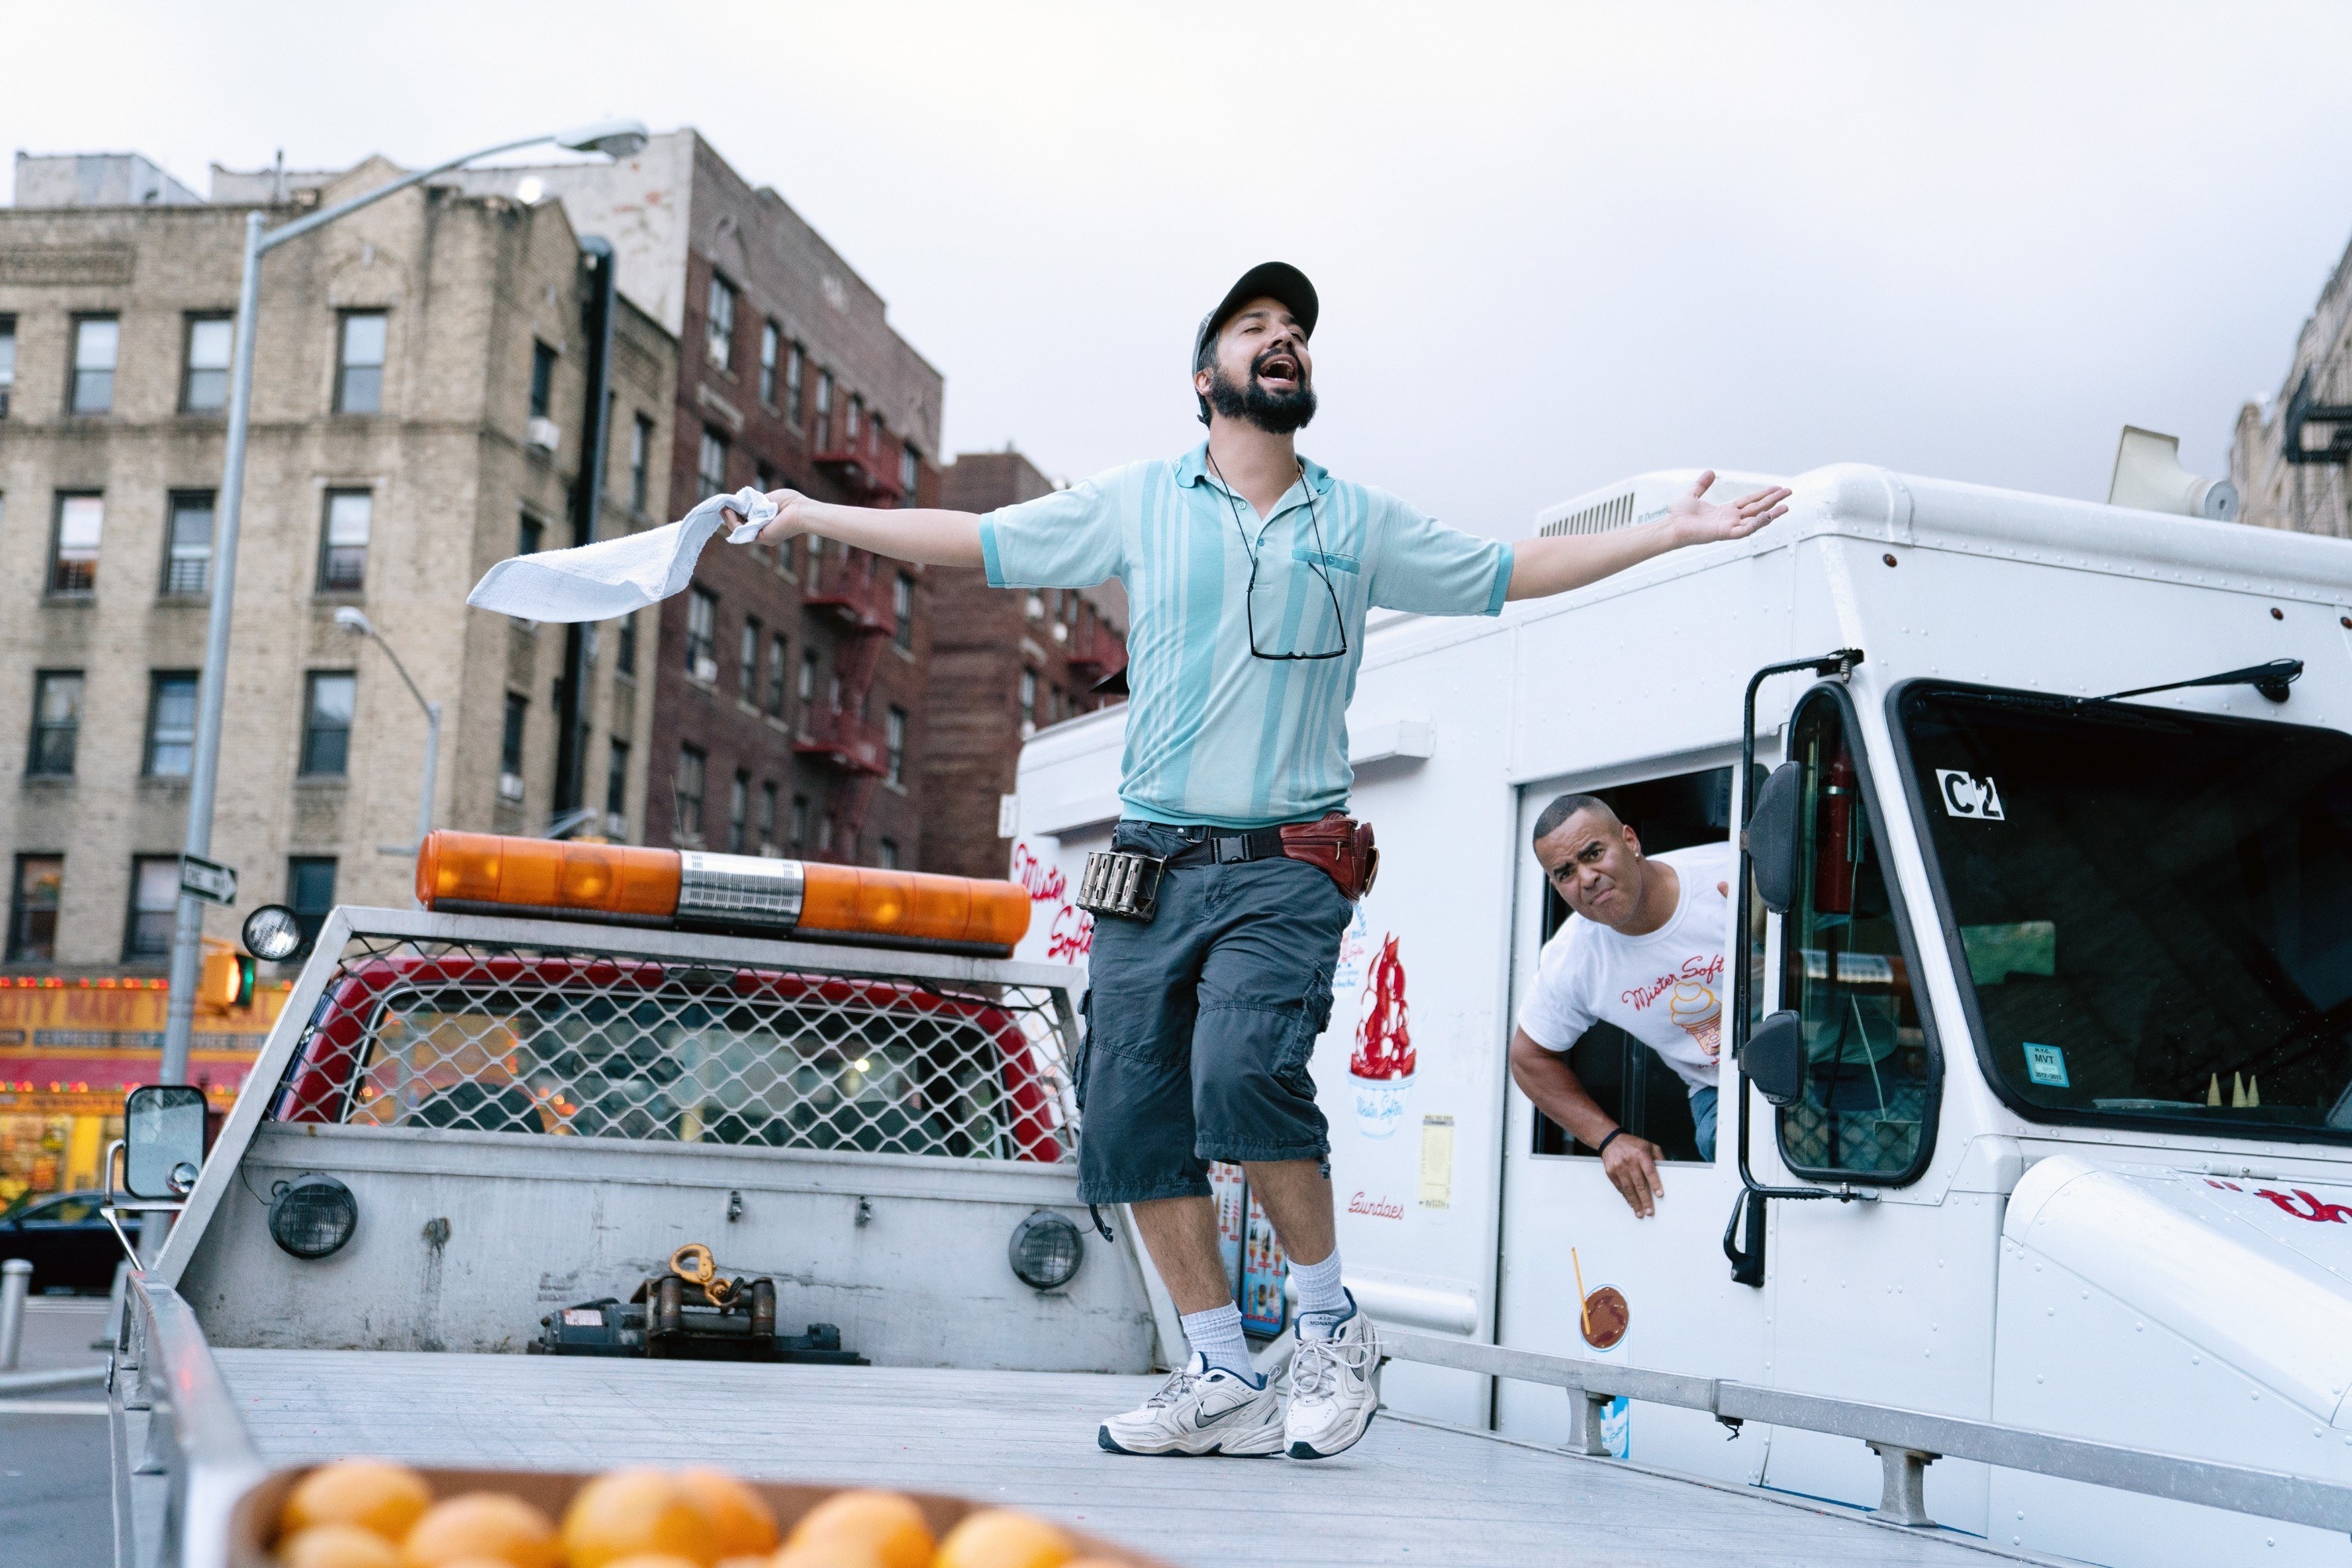 The piragüero dancing on the back of a truck while the Mr. Softee driver watches